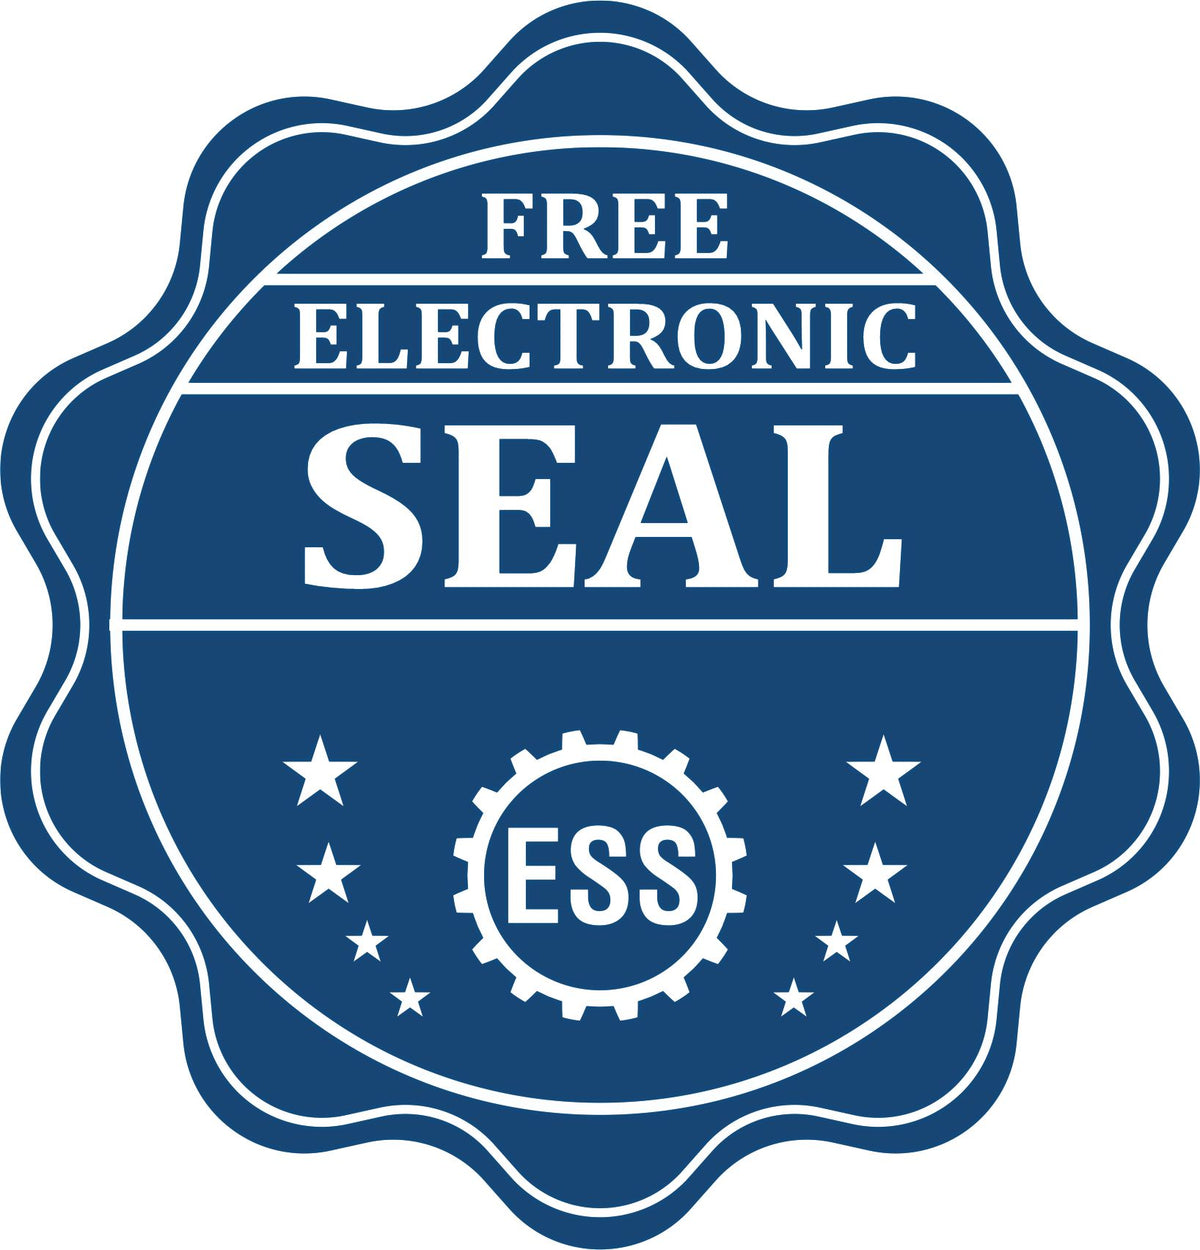 A badge showing a free electronic seal for the Heavy Duty Cast Iron North Dakota Engineer Seal Embosser with stars and the ESS gear on the emblem.